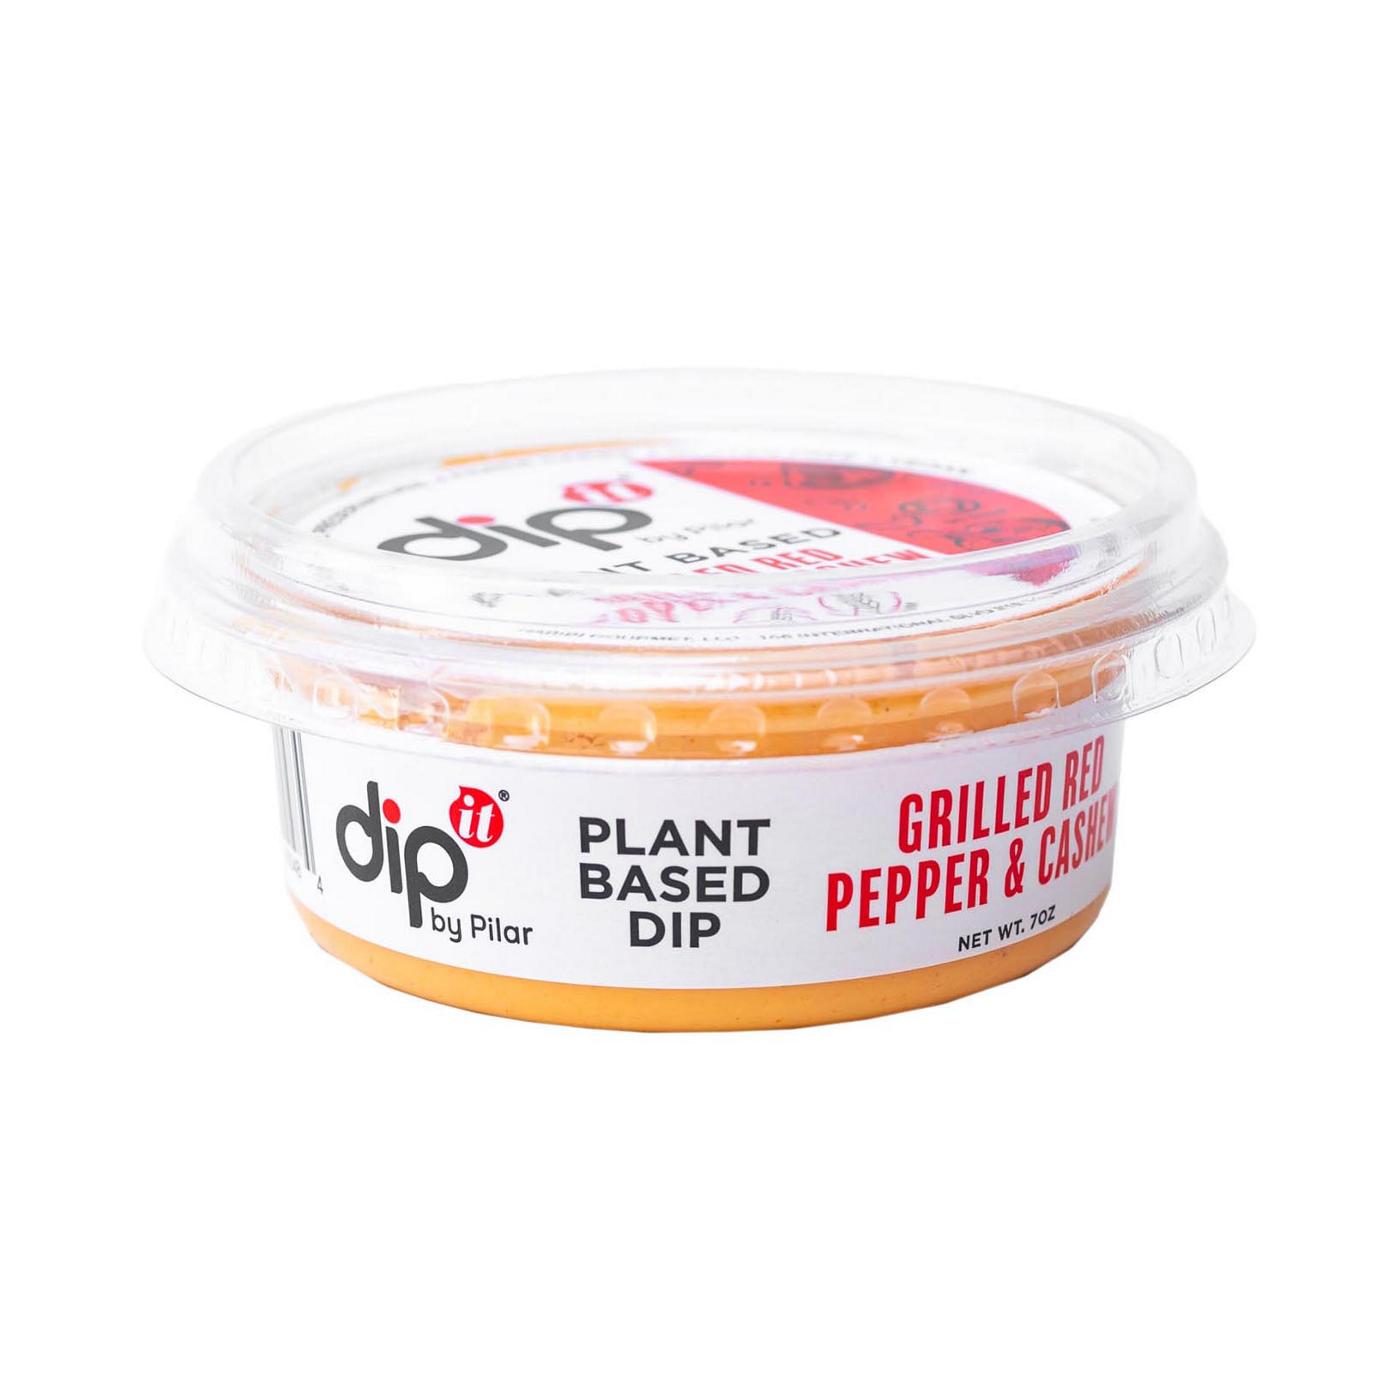 Dip It Plant-Based Grilled Red Pepper & Cashew Dip; image 1 of 2